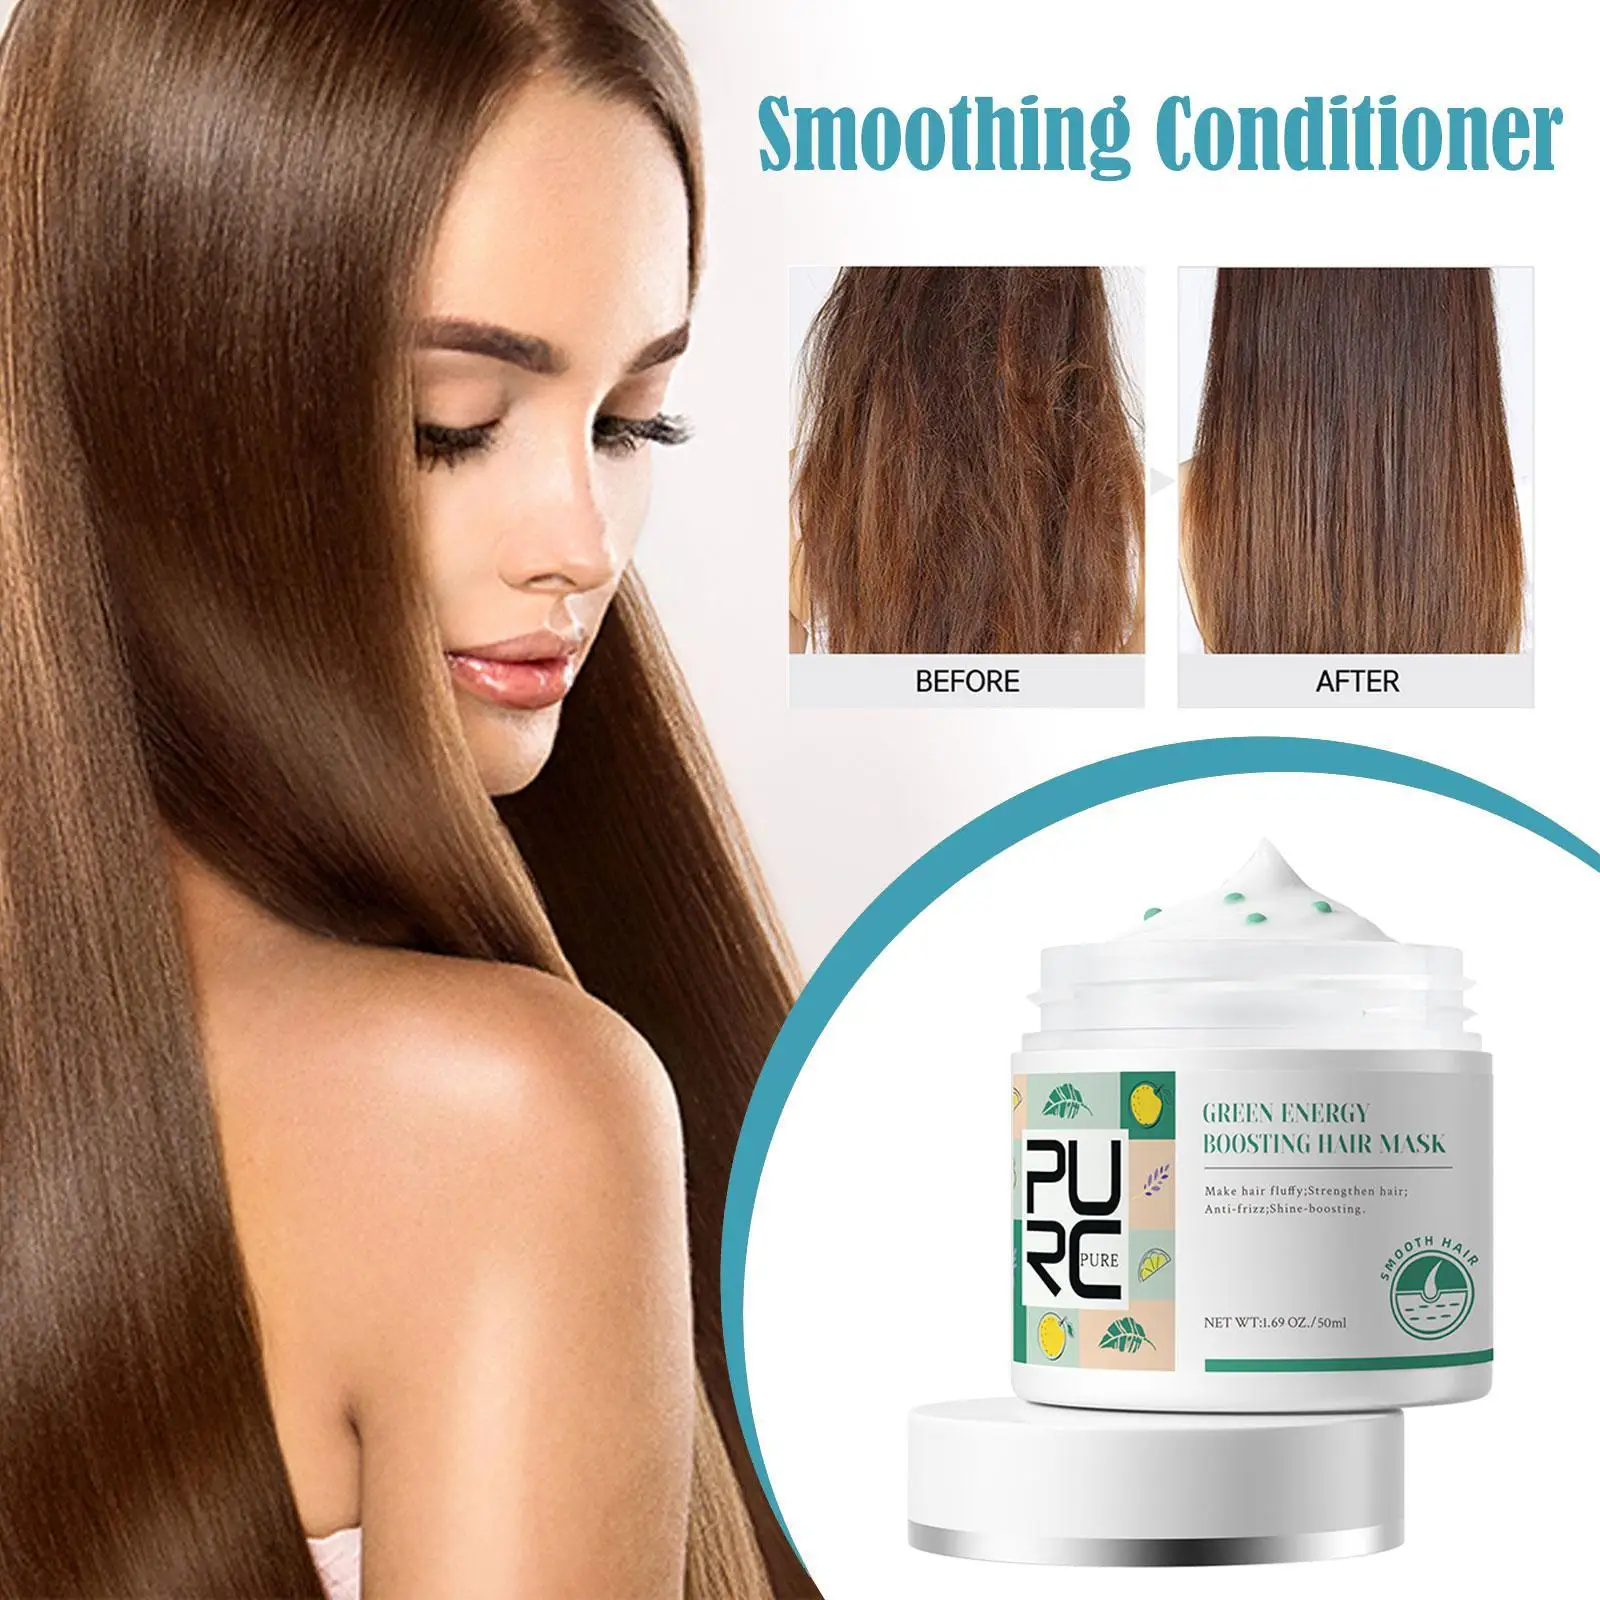 

PURC Keratin Hair Mask Repair Dry Damaged Moisturizing Smoothing Scalp Treatments Smooth Hair Care Products 50ml Hot